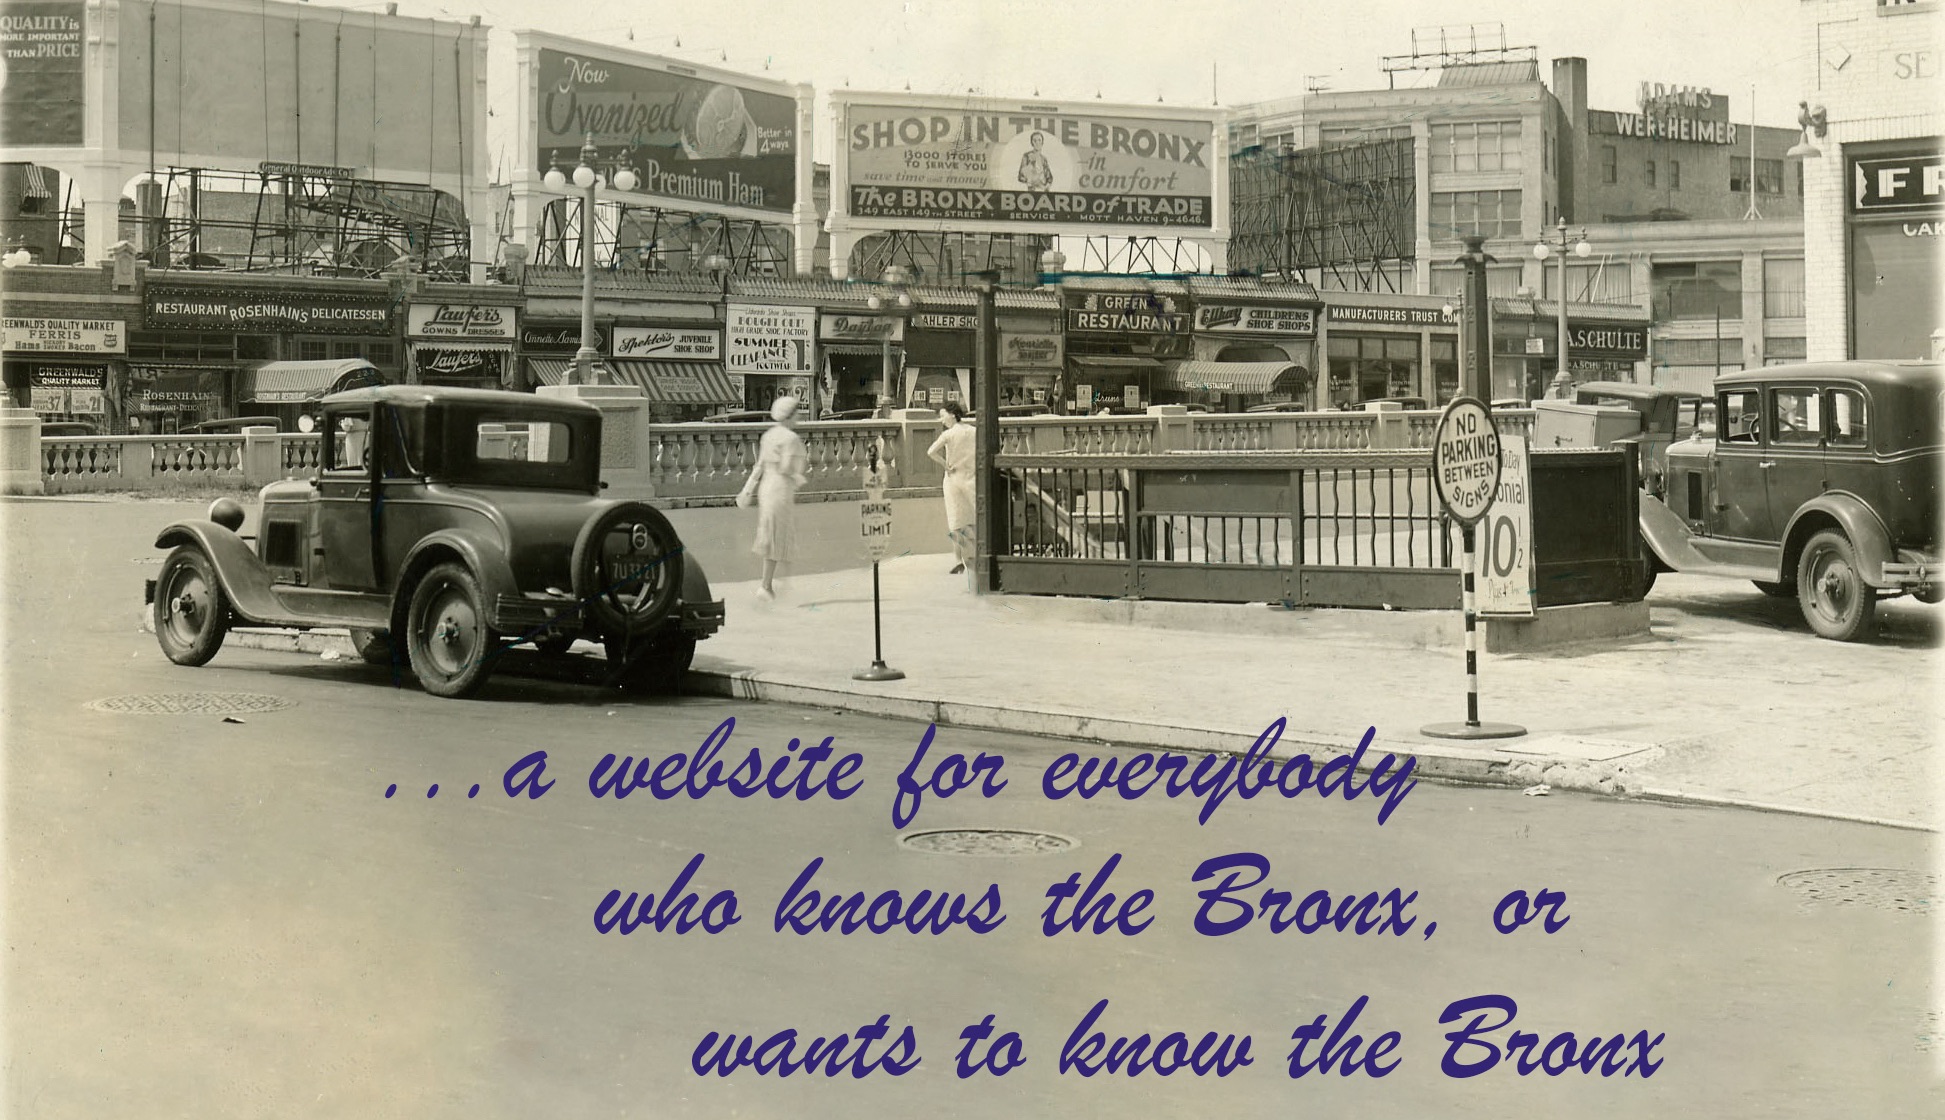 Image of people, cars, and stores with the words "a website for everybody who knows the Bronx, or wants to know the Bronx.